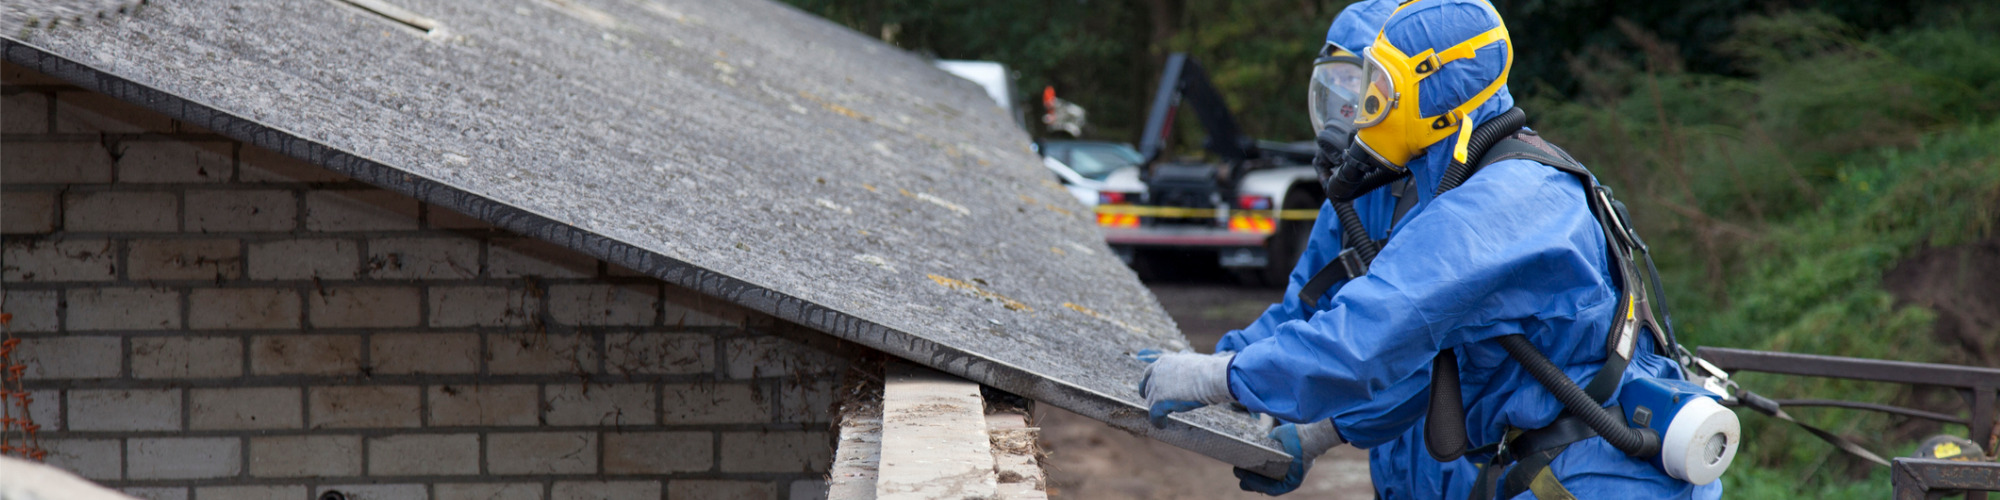 Low Exposure Asbestos Claims - The Key Issues